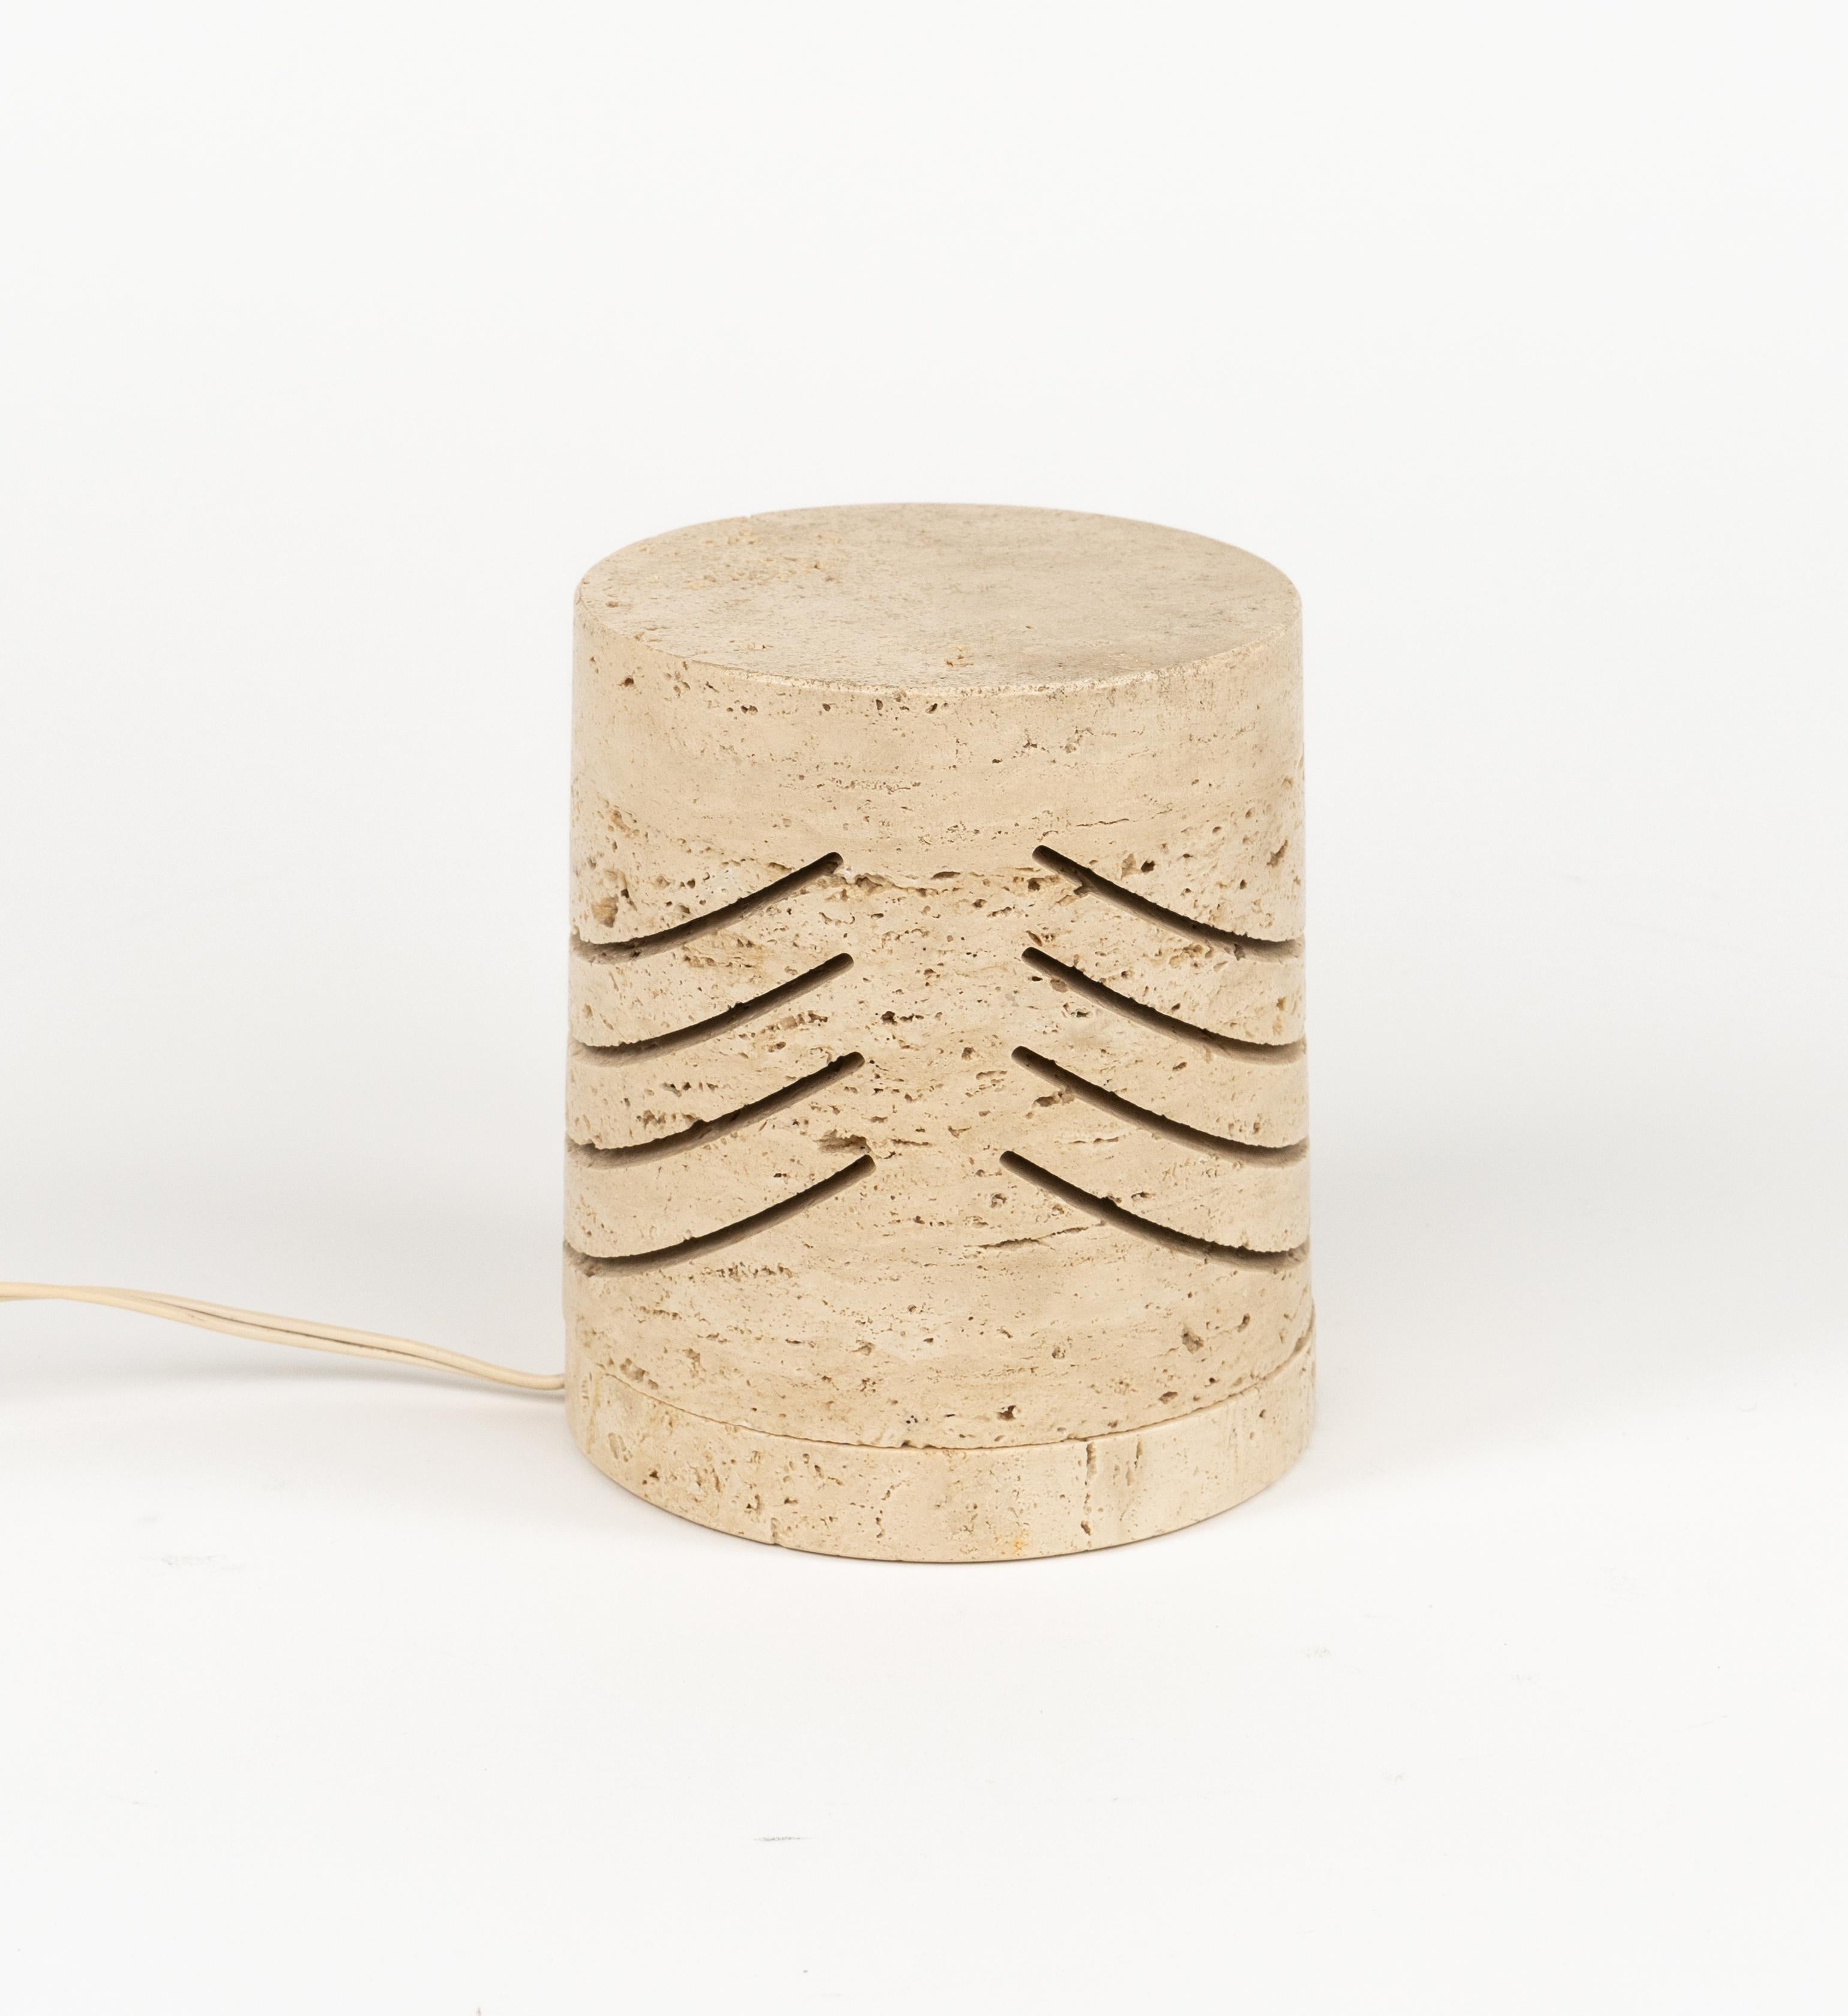 Midcentury amazing   travertine marble table lamp by Giuliano Cesari manufactured for Nucleo Sormani.

Made in Italy in the 1970s.

Compact travertine piece with minimal lighting cuts, emphasizing the stone texture.

European plug (works outside EU